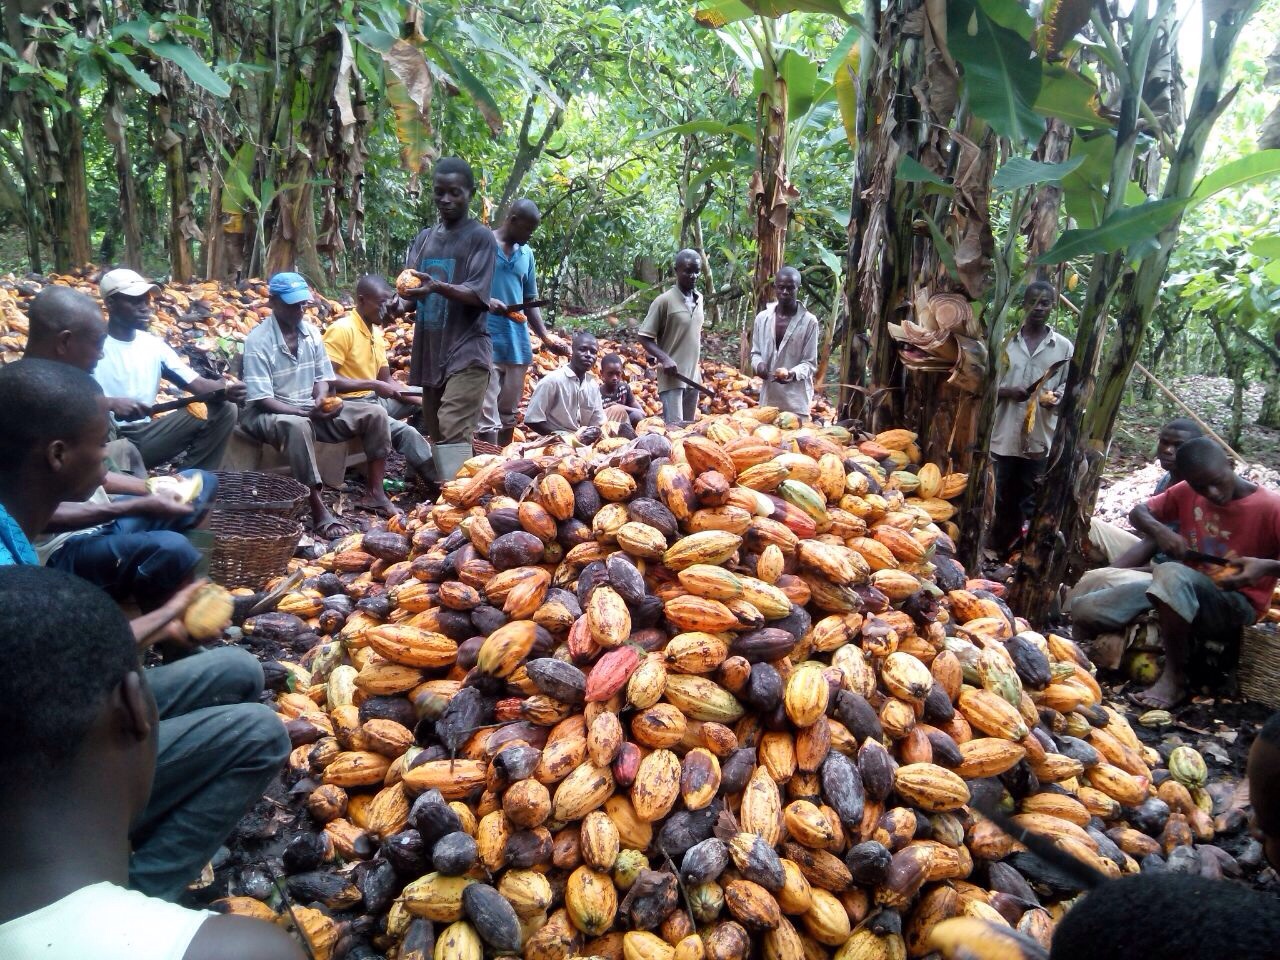 File:Cocoa farmers during harvest.jpg - Wikimedia Commons